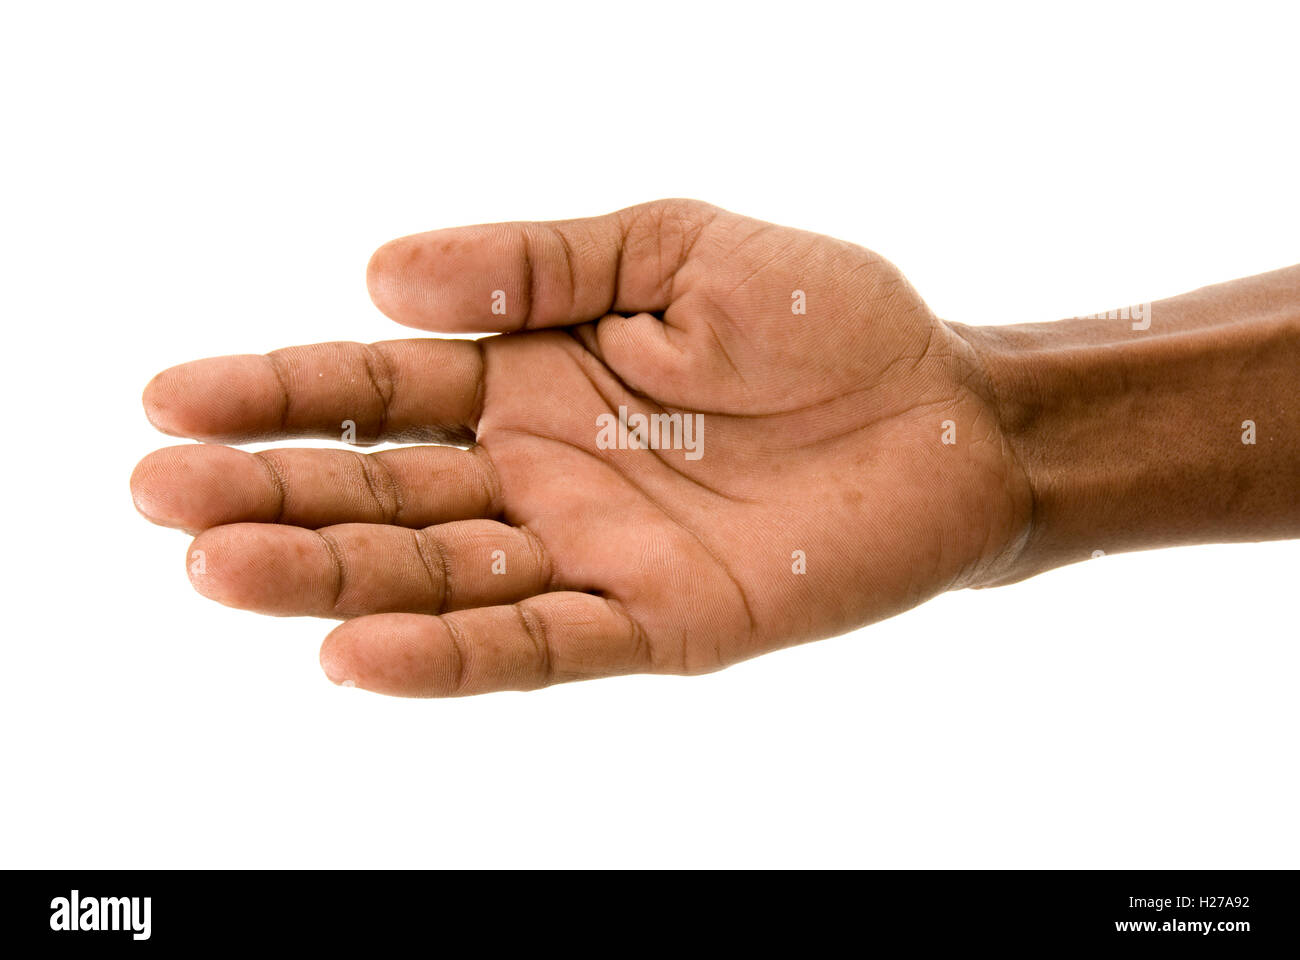 African's hand offered in friendship or which could be begging or asking for help. Stock Photo